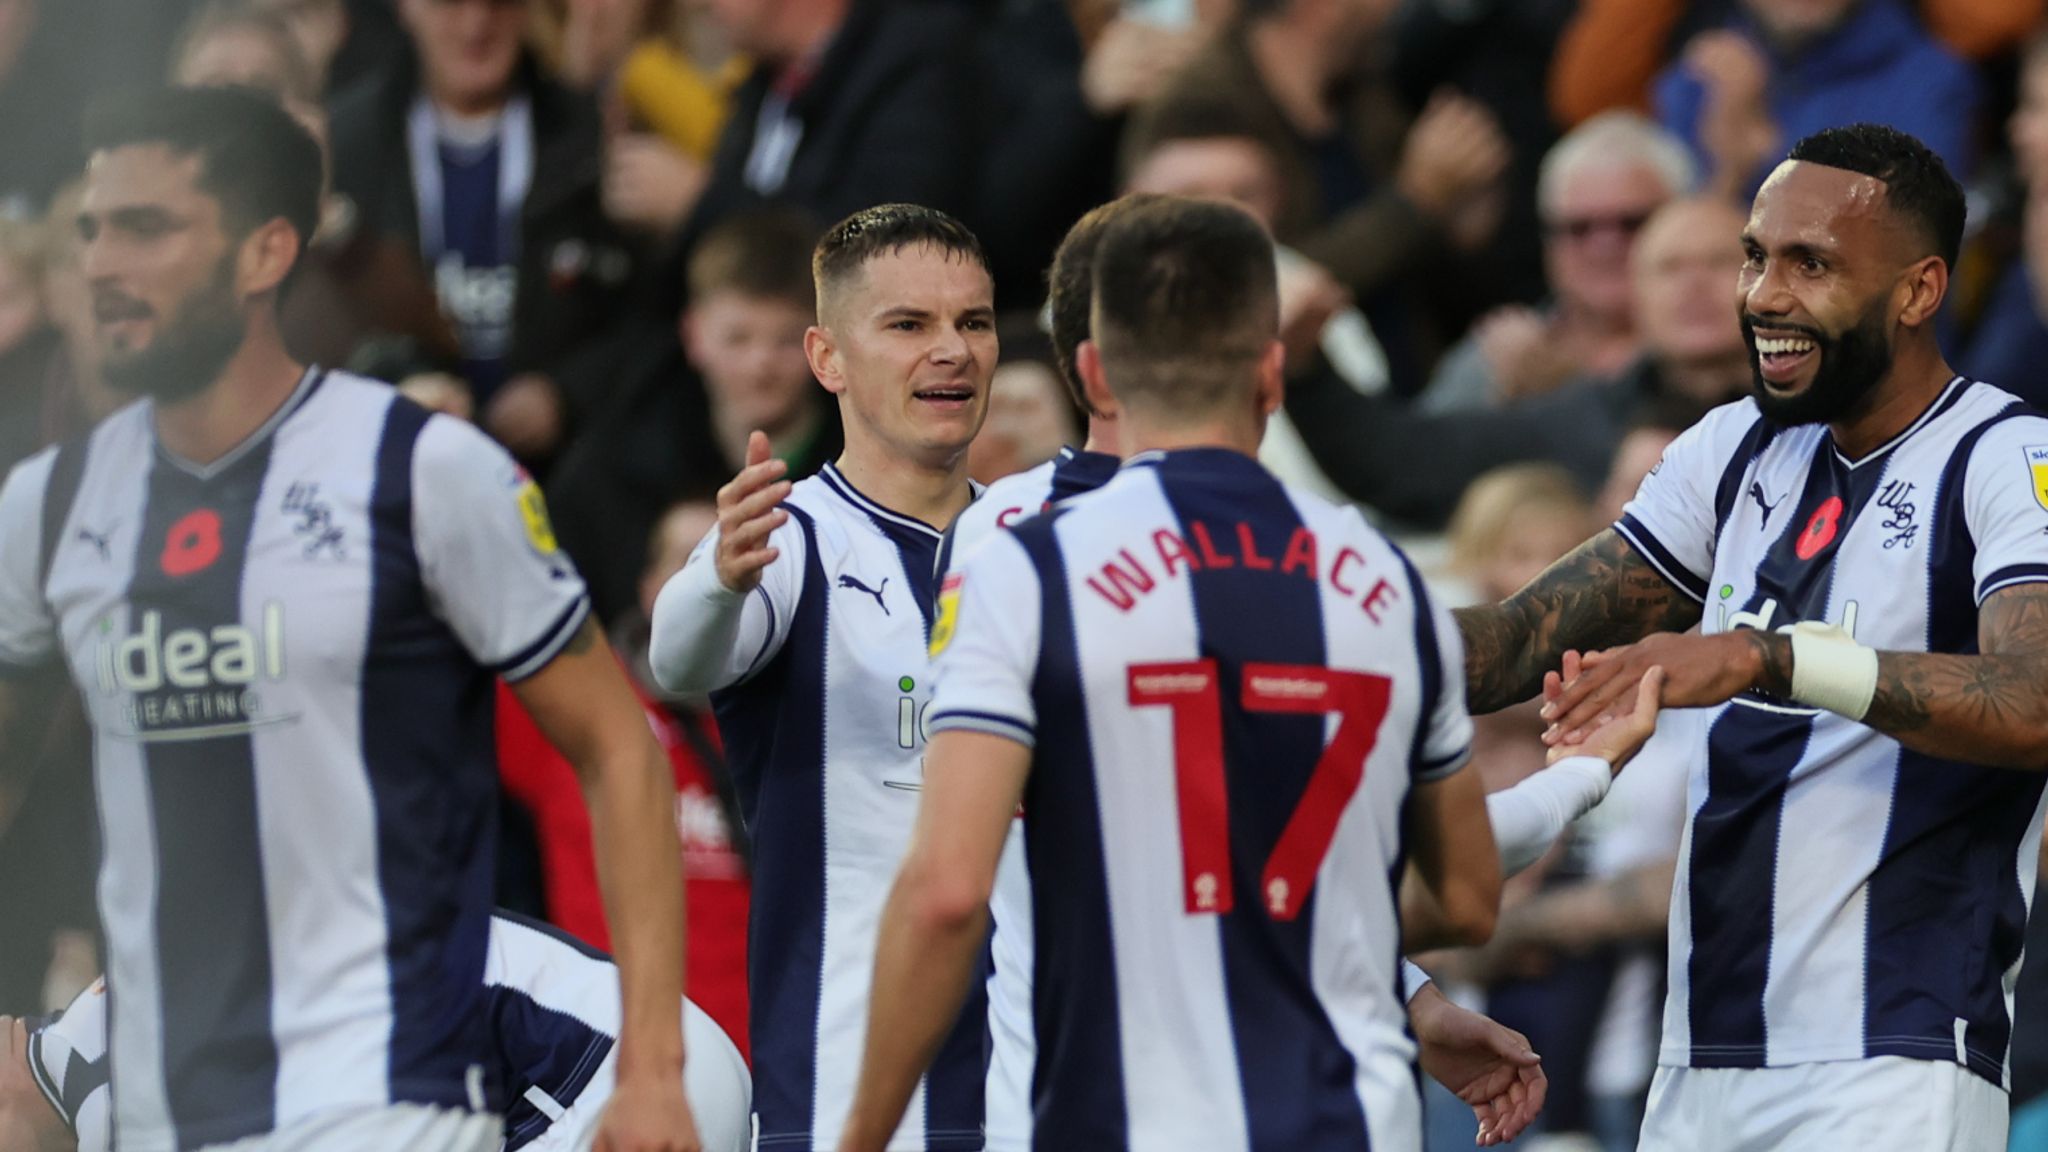 Championship: West Brom go top of table after thrashing Cardiff